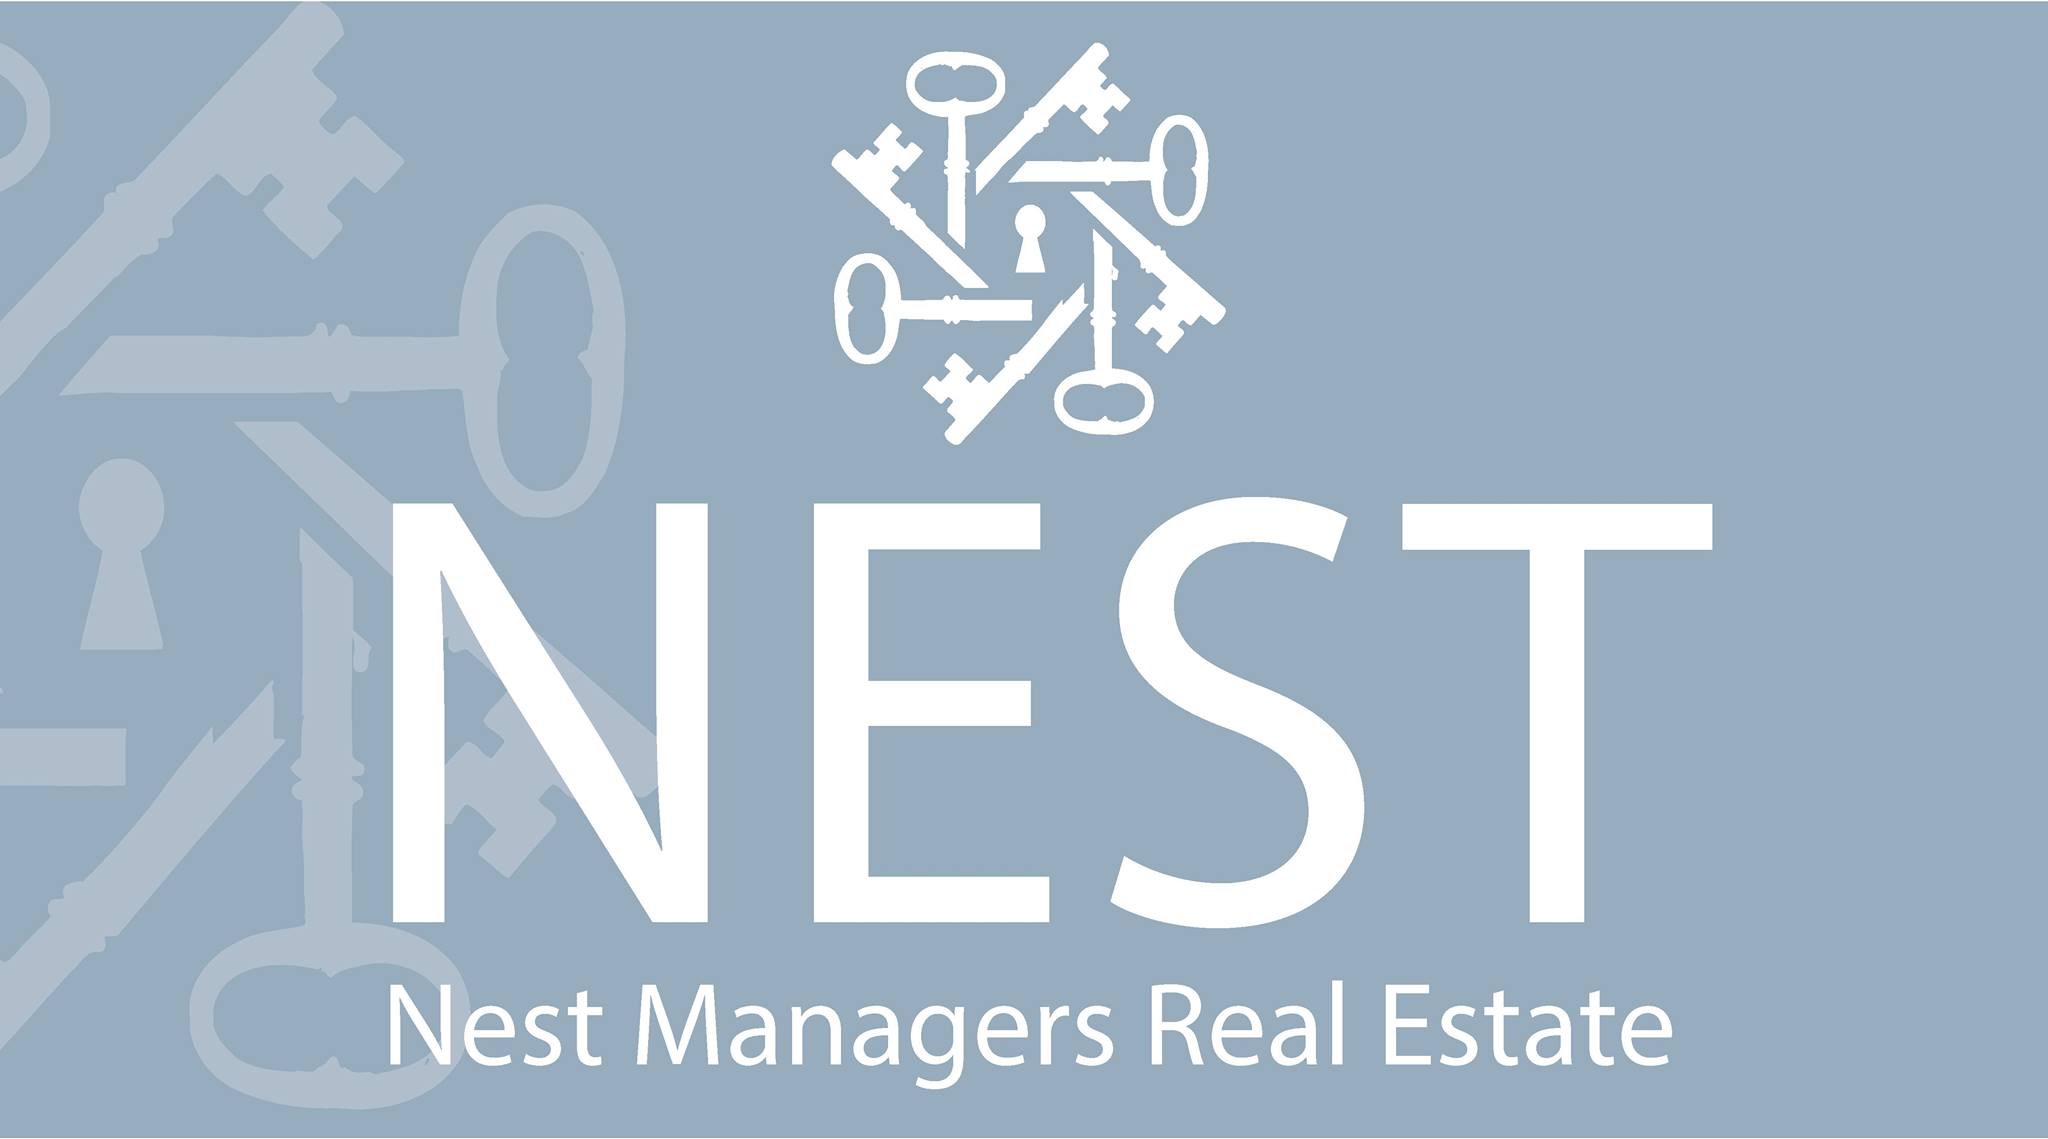 Nest Managers Real Estate